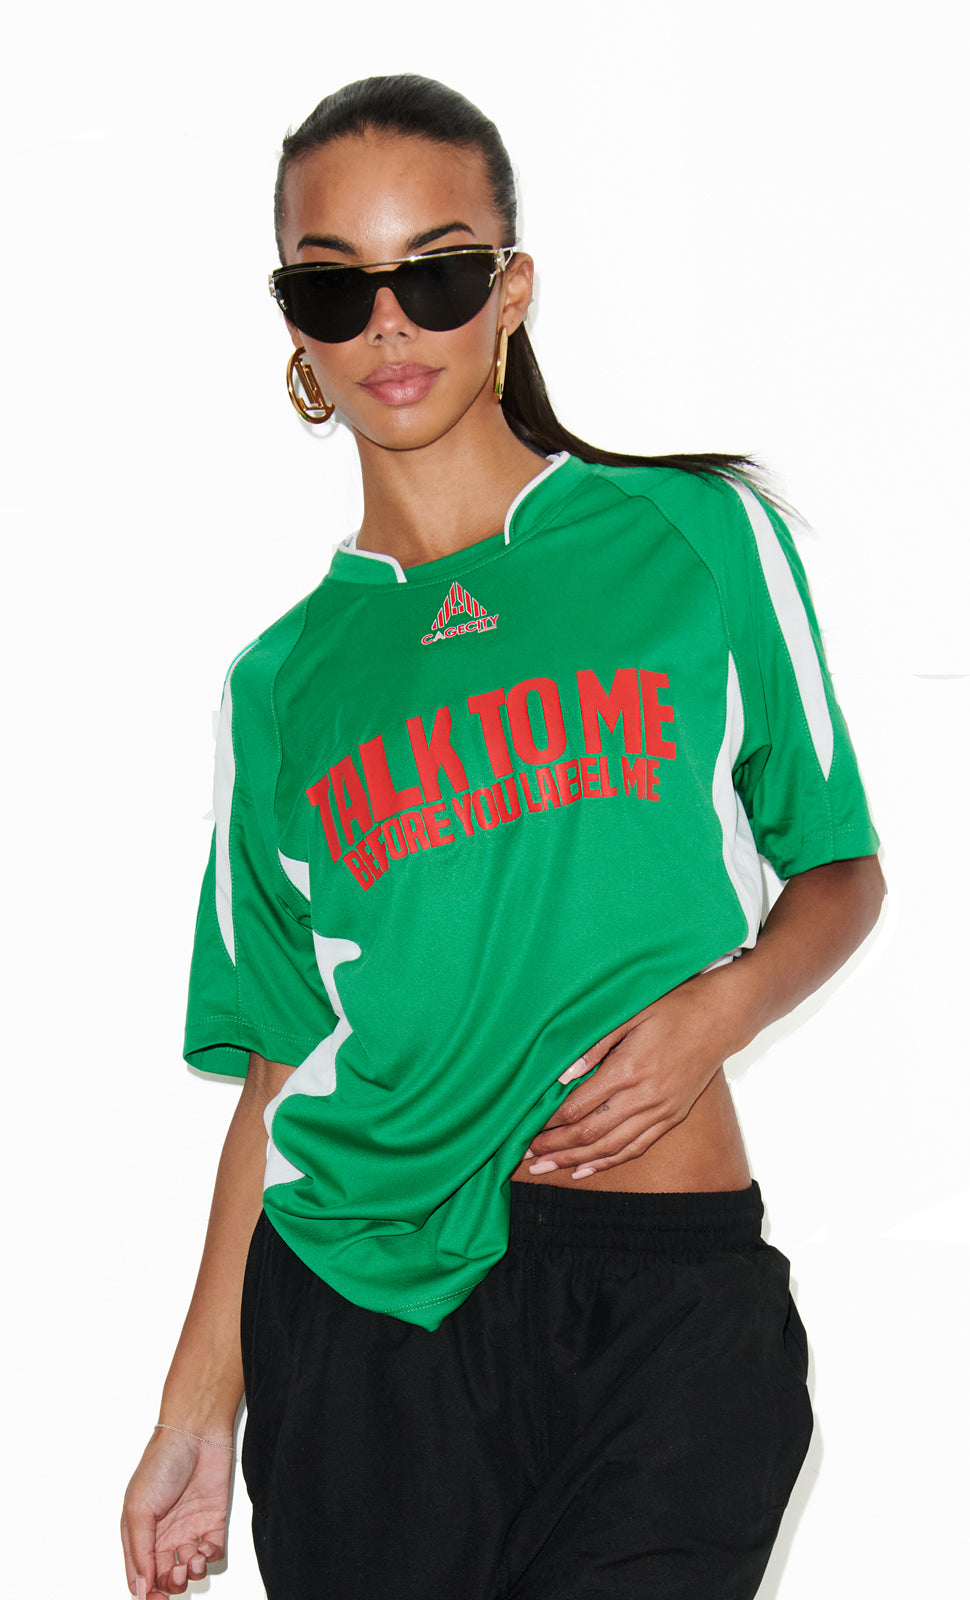 Talk To Me Before You Label Me Football Tee in Green and Red